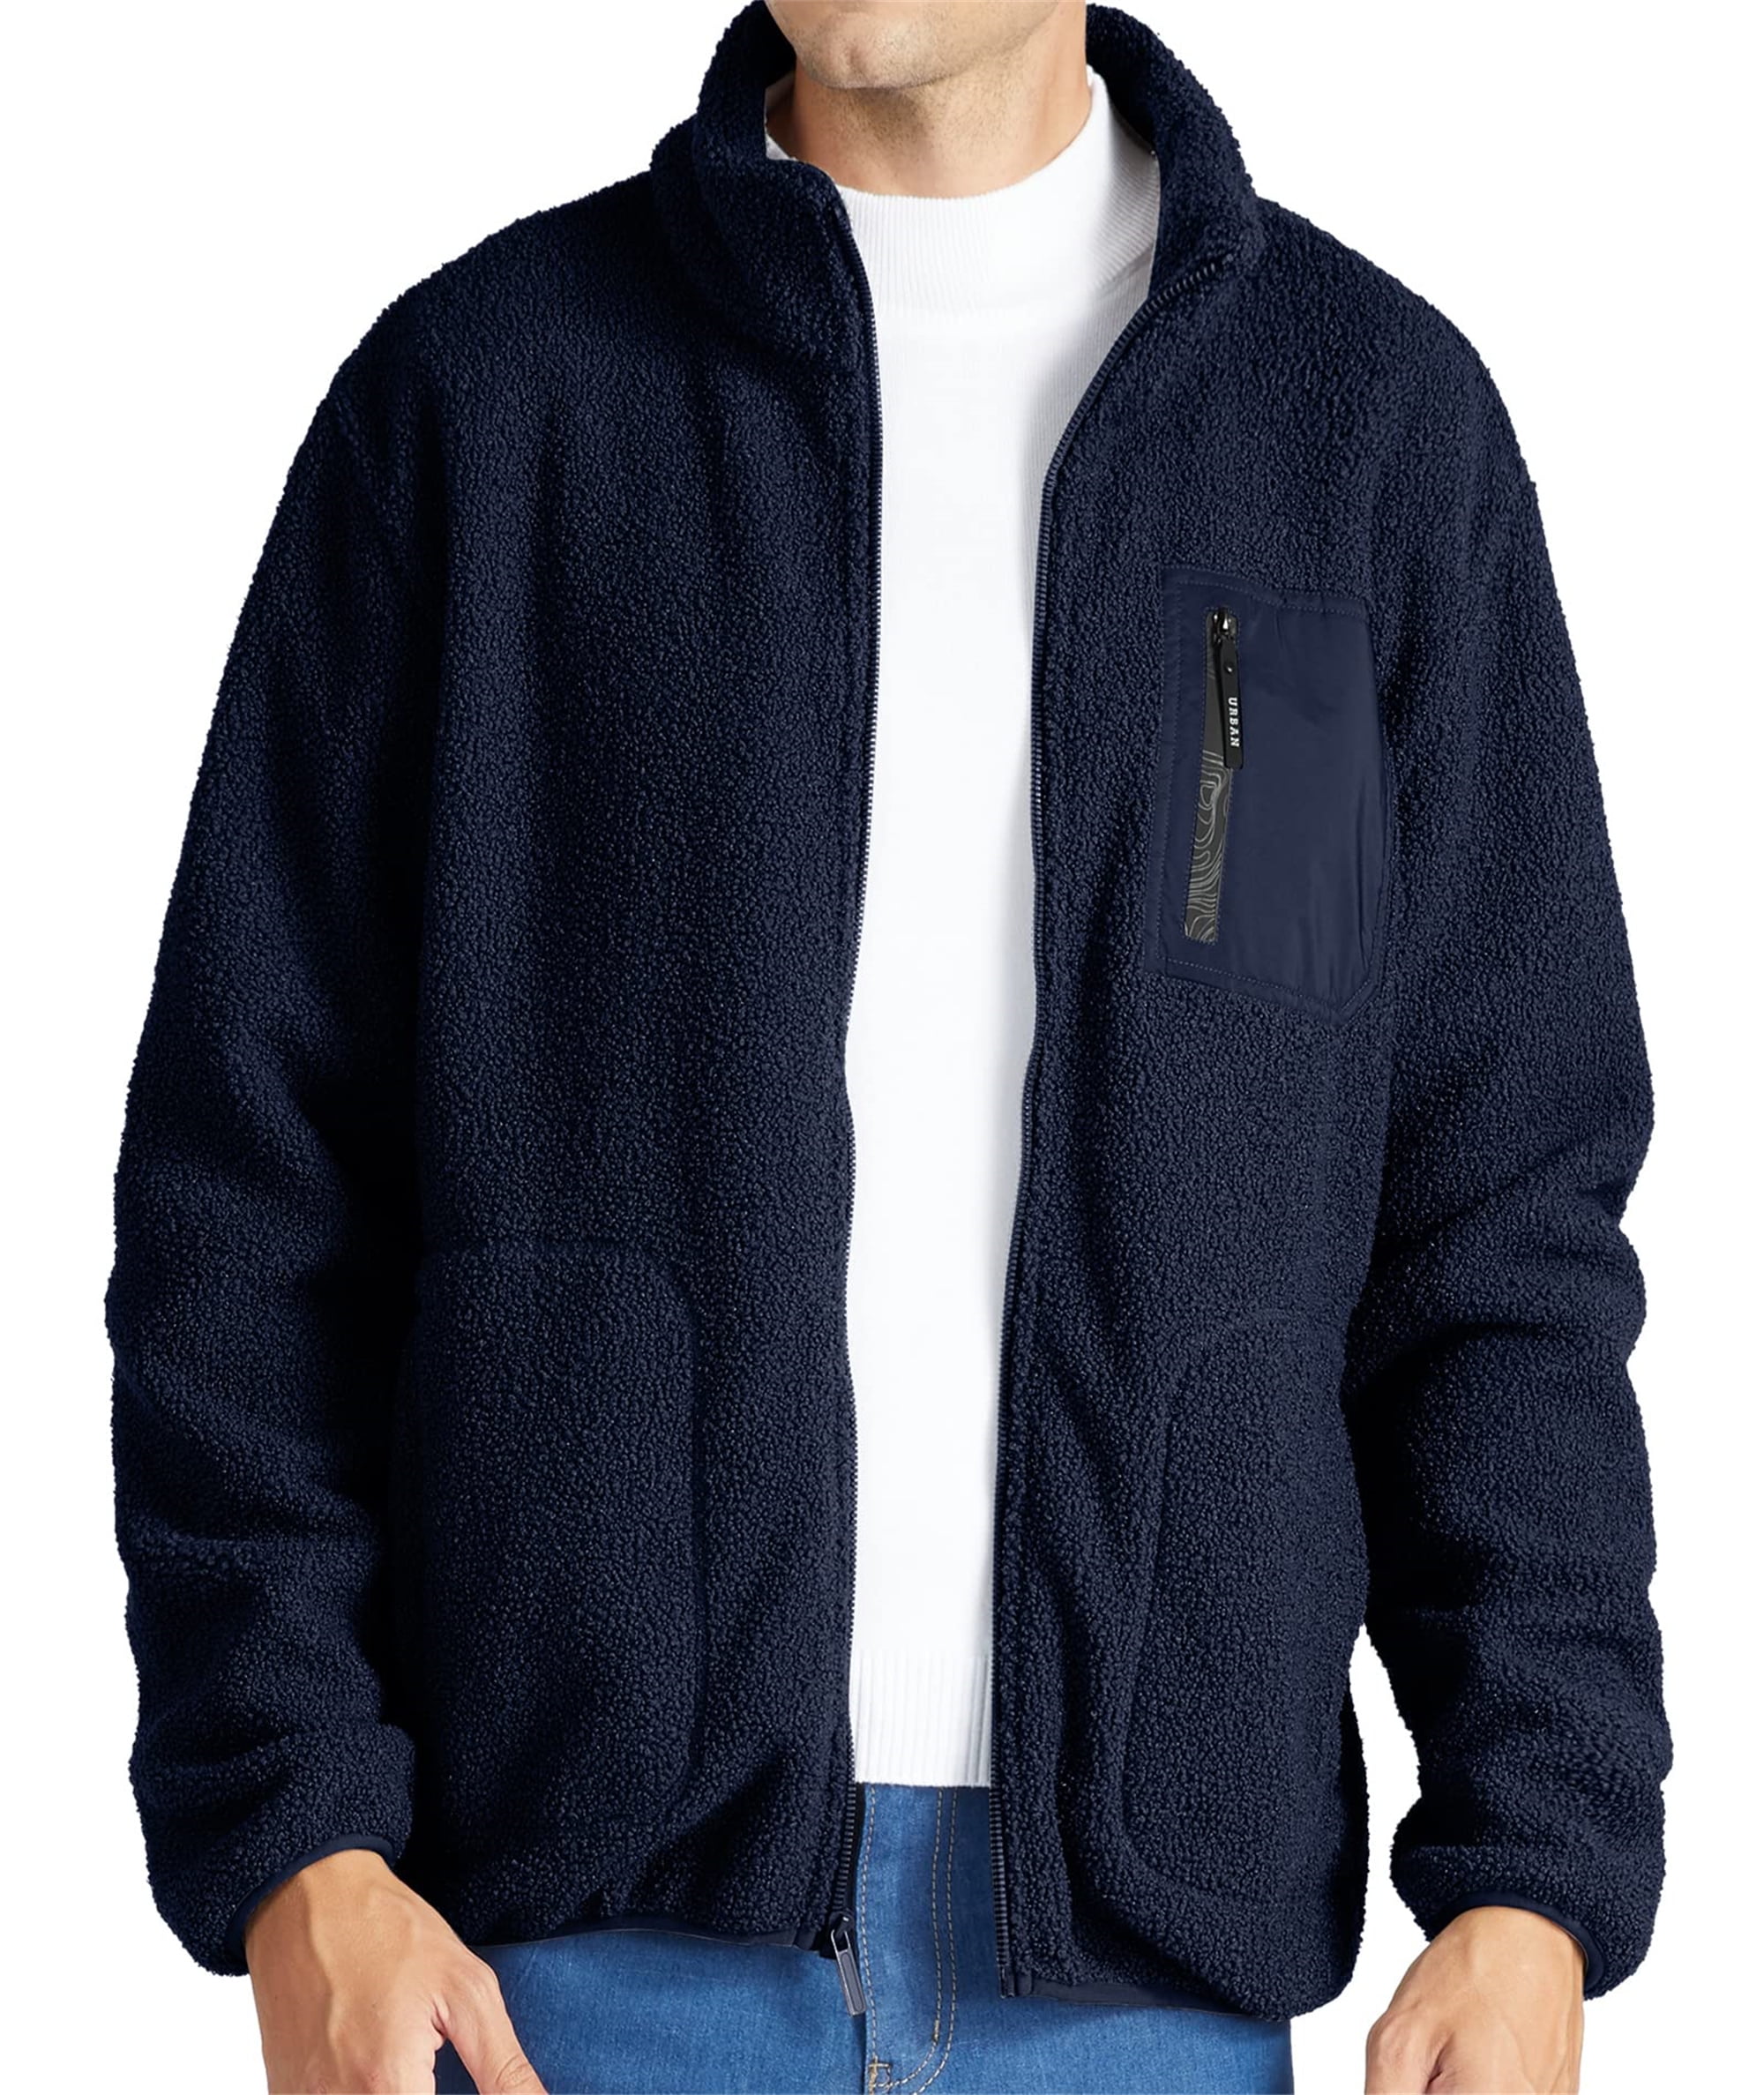 ZITY Men's Winter 220GSM Fleece Jackets with Pockets,Sizes Small to 3XL ...